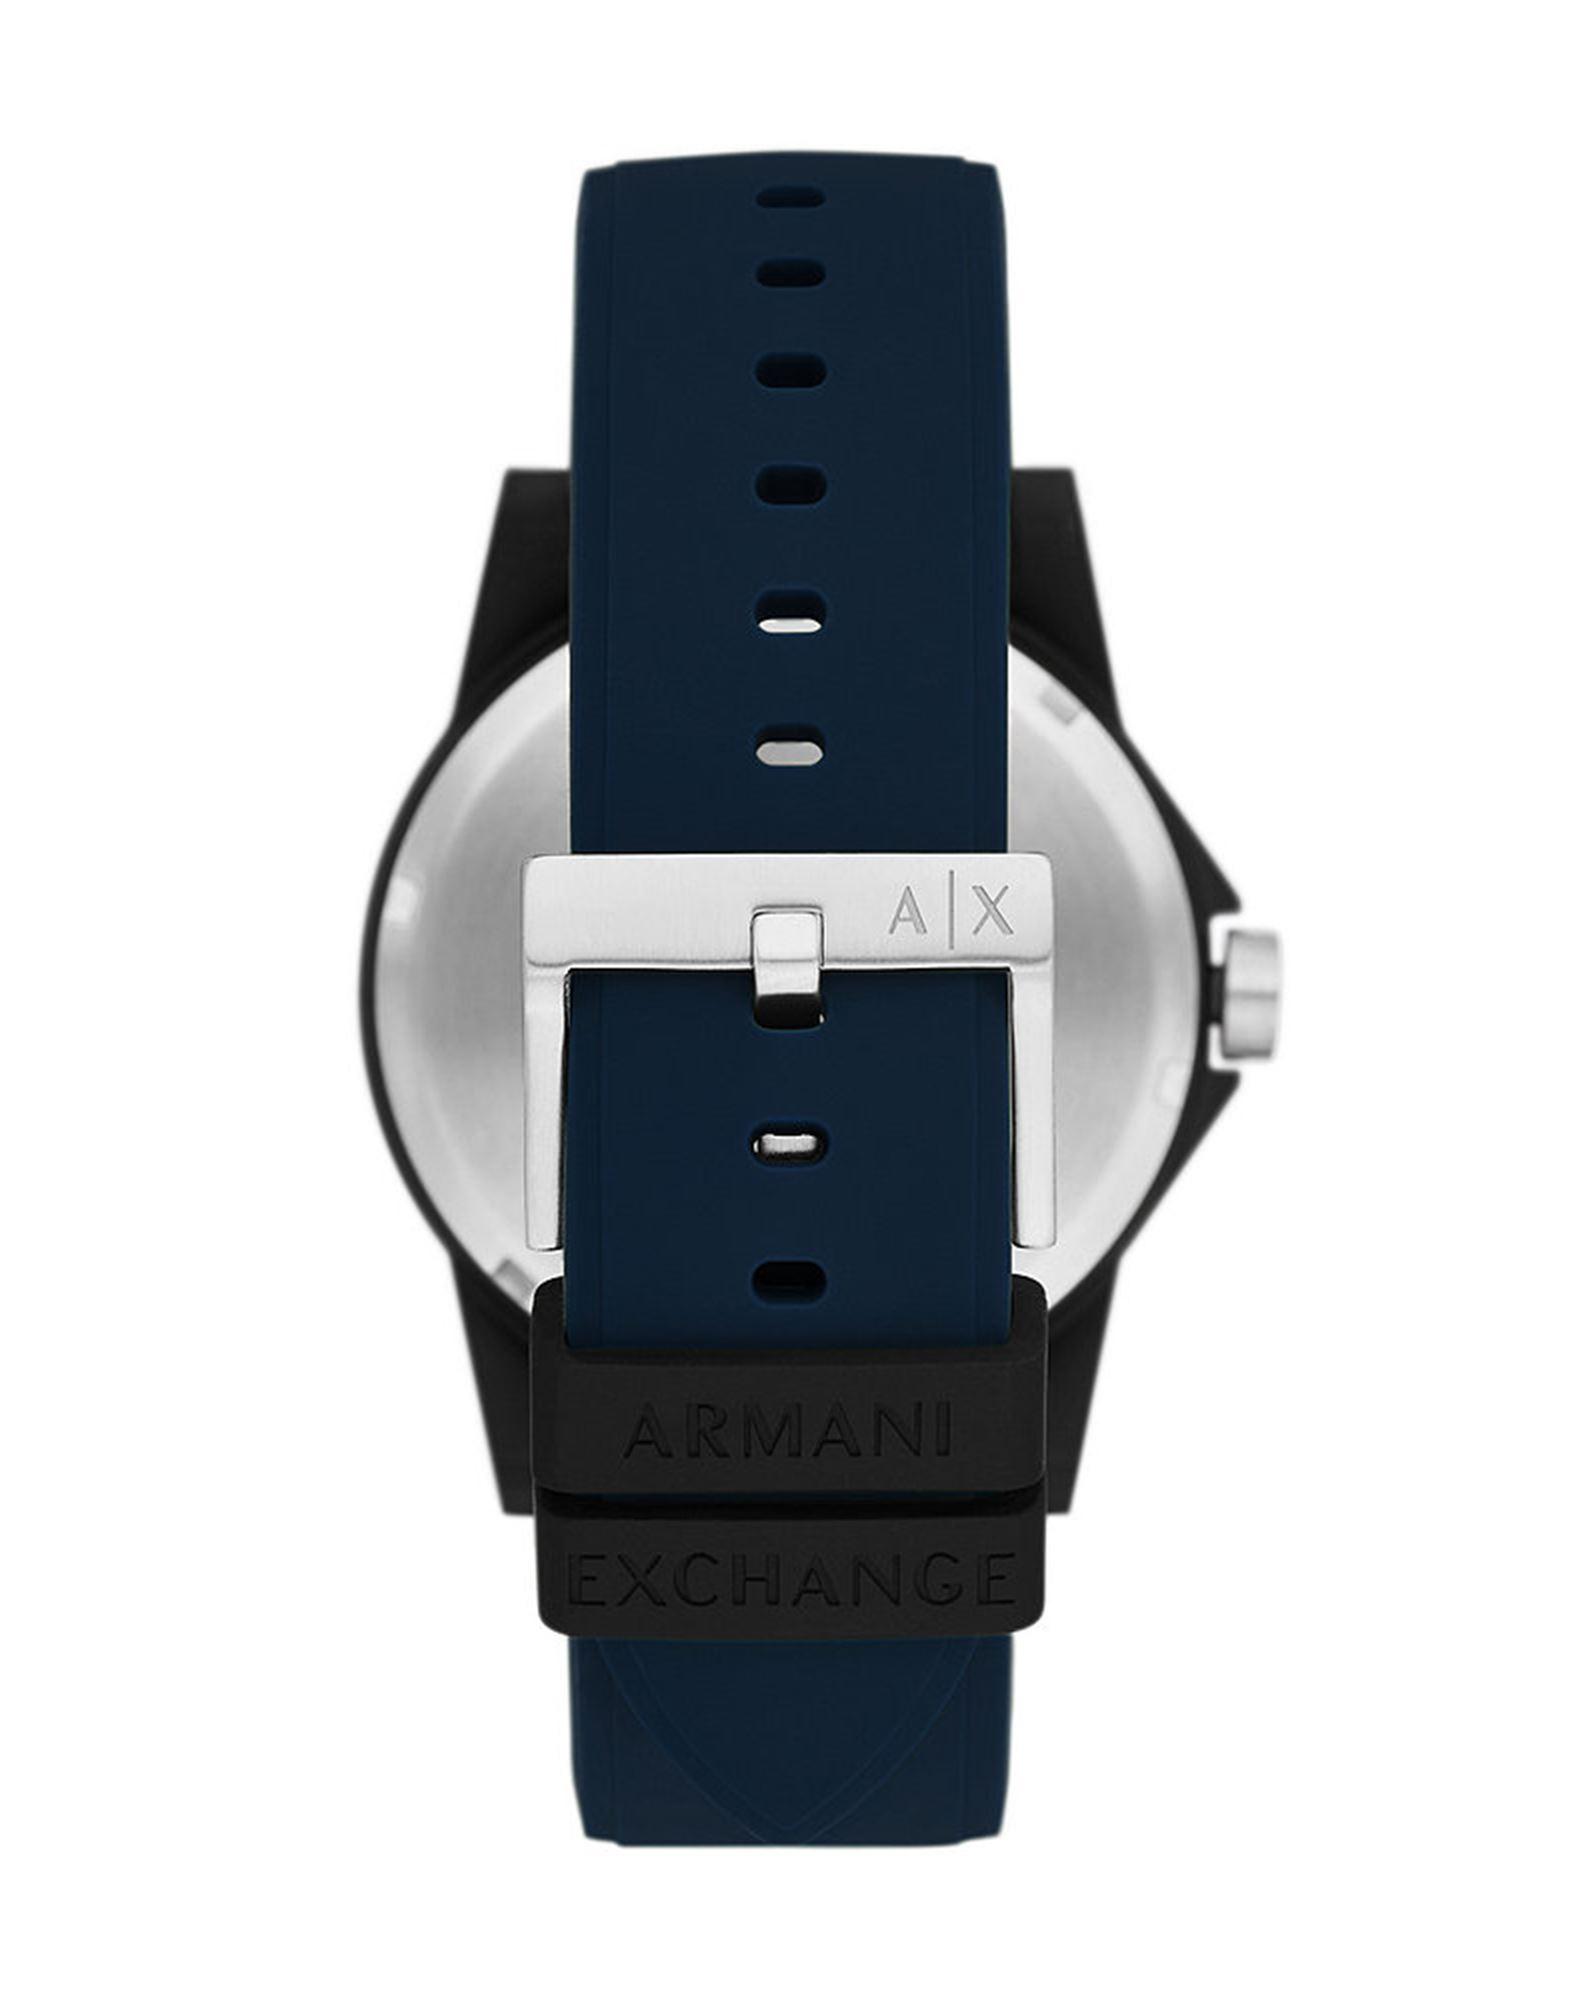 Armani Exchange Mens Watches Armani Exchange Watches Stinless Steel Qurtz Wtch With Silicone Strp in Blue for Men 